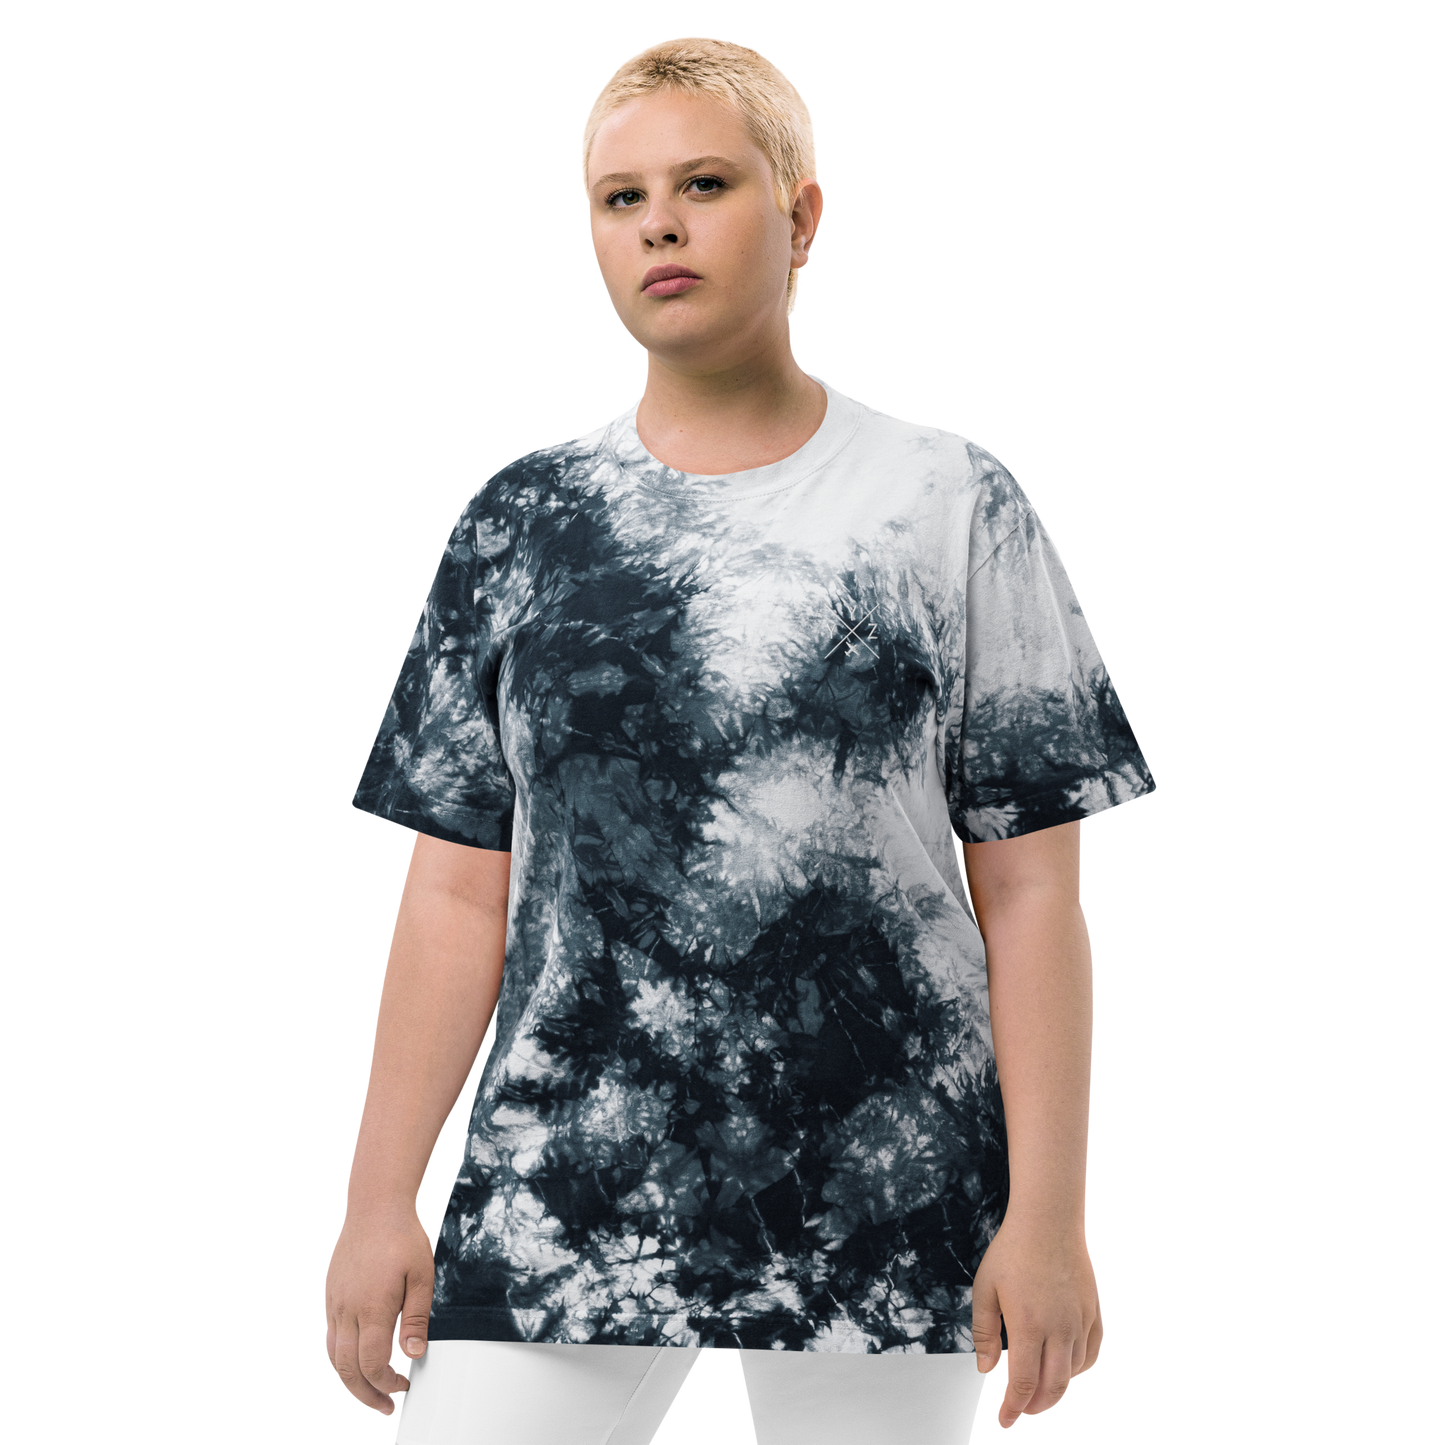 YHM Designs - YYZ Toronto Oversized Tie-Dye T-Shirt - Crossed-X Design with Airport Code and Vintage Propliner - White Embroidery - Image 16